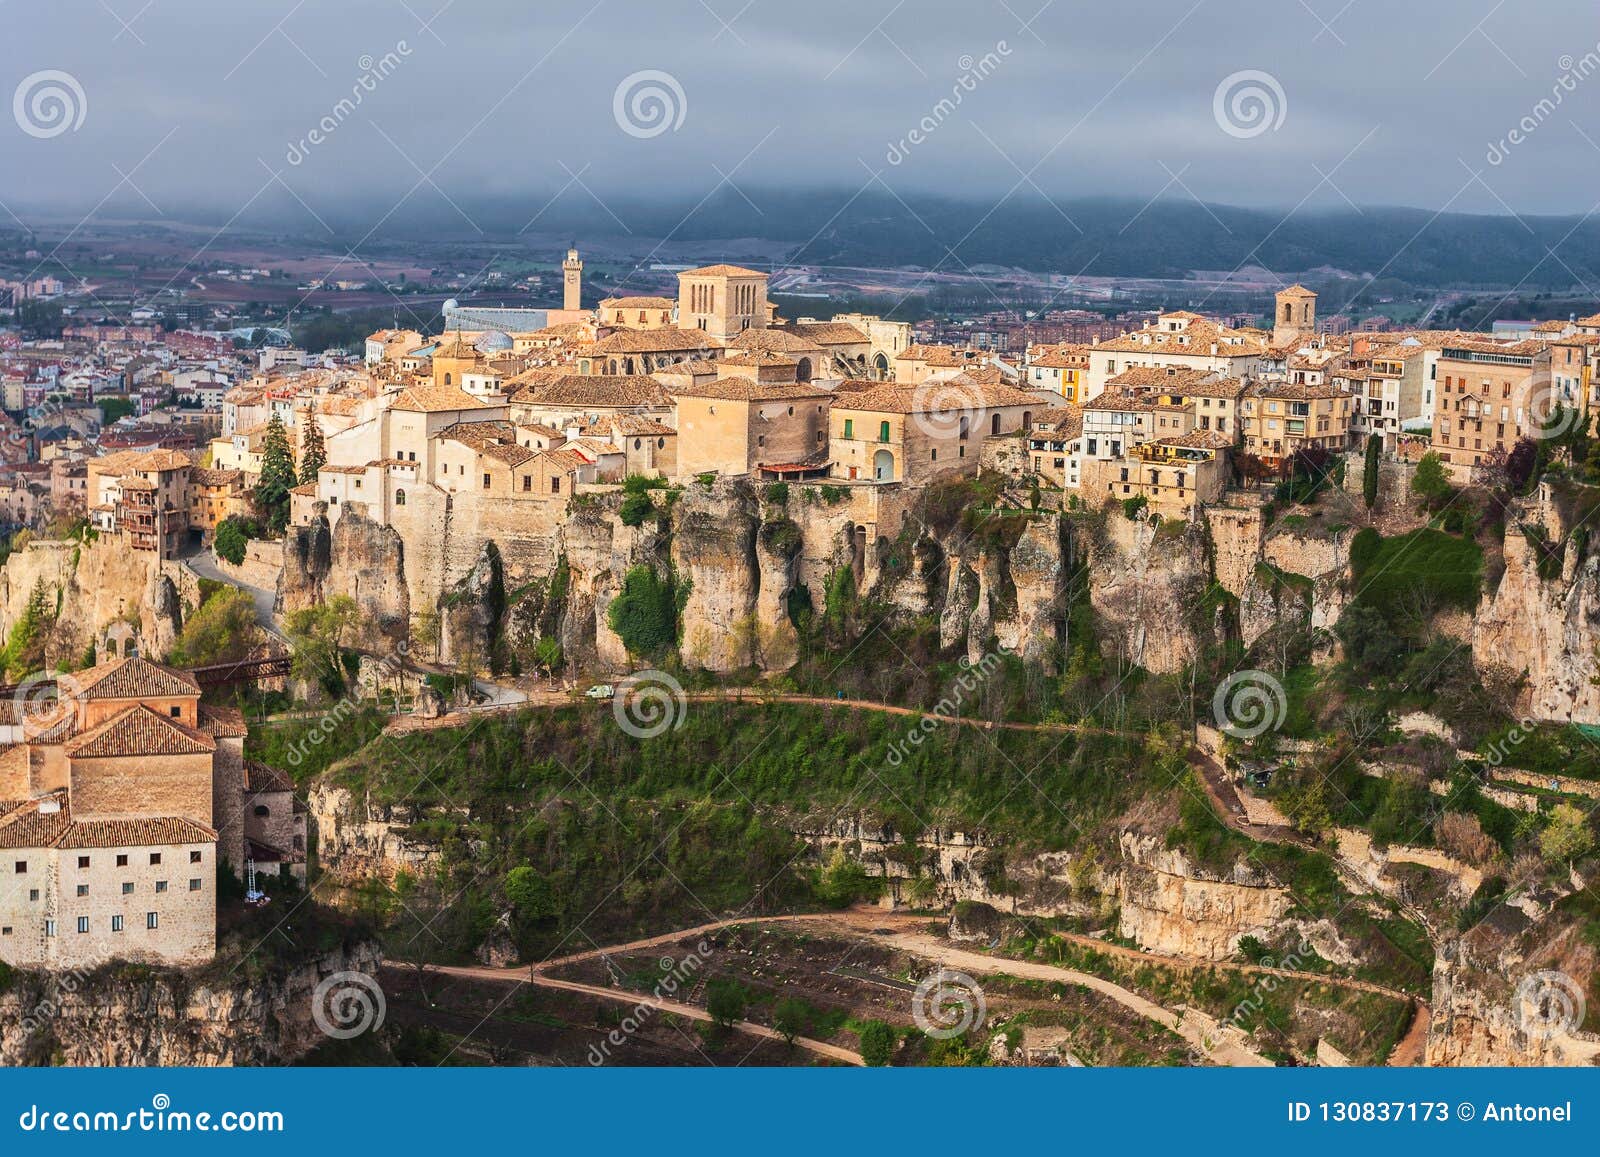 hanging houses in the medieval town of cuenca, in castilla la mancha, spain. gorge of the huecar river